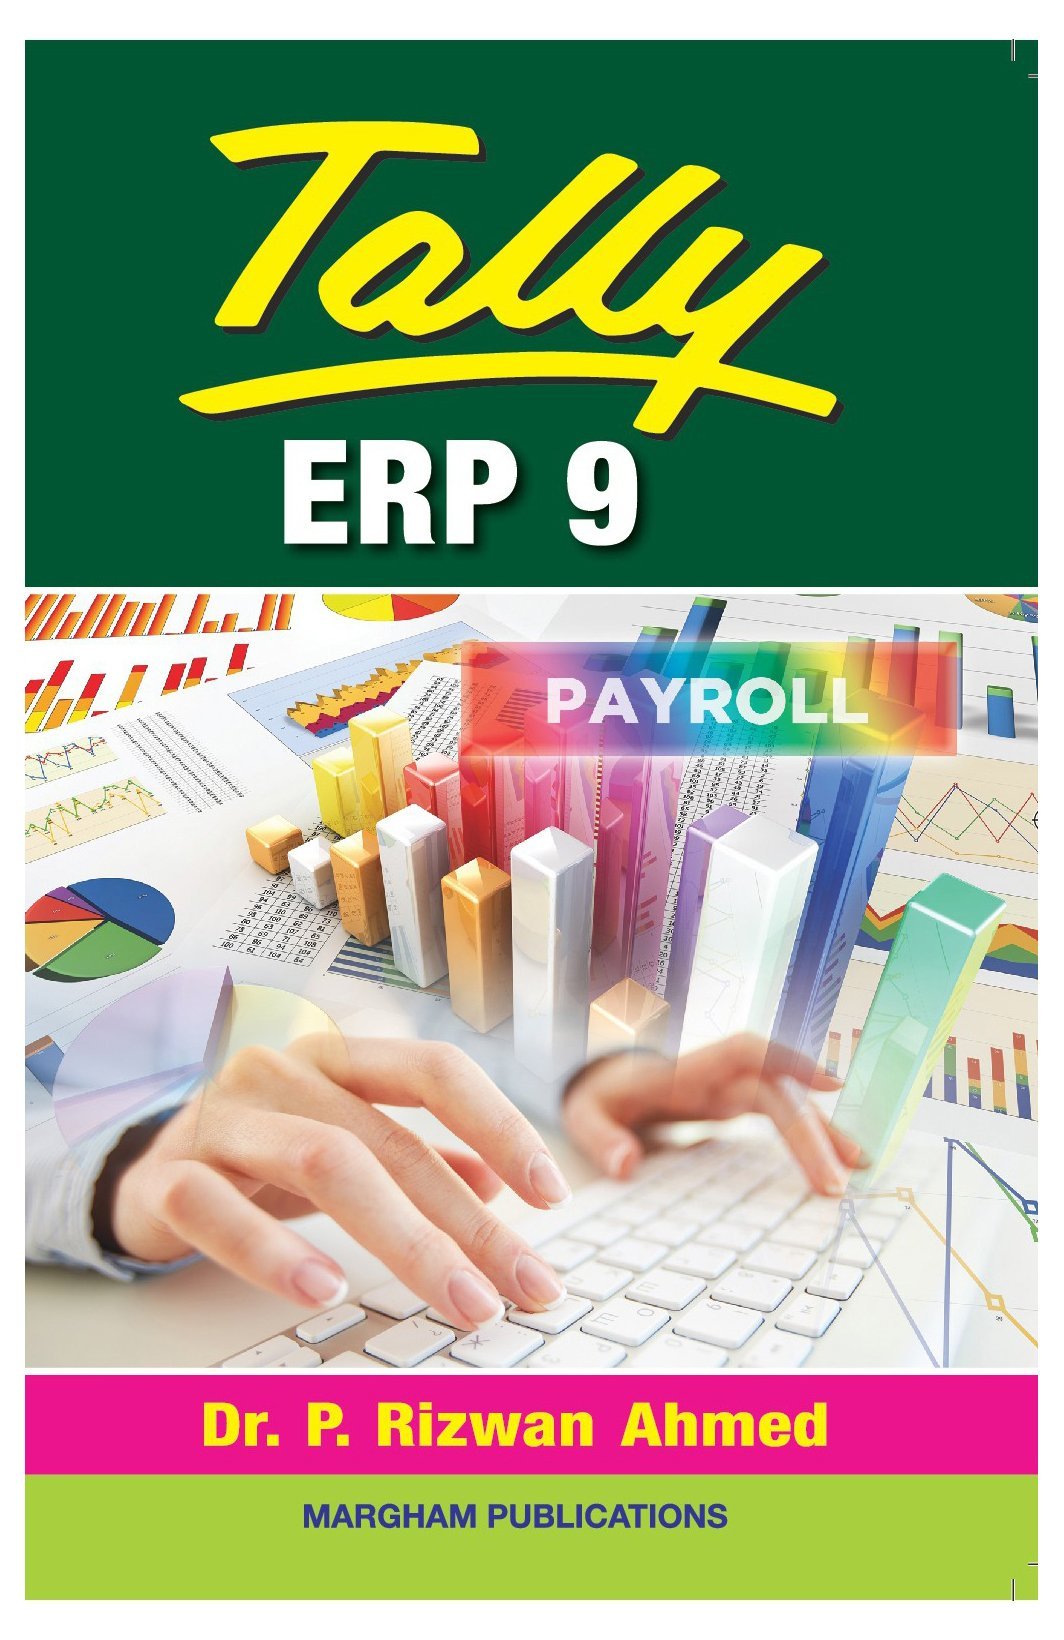 tally erp 9 assignments